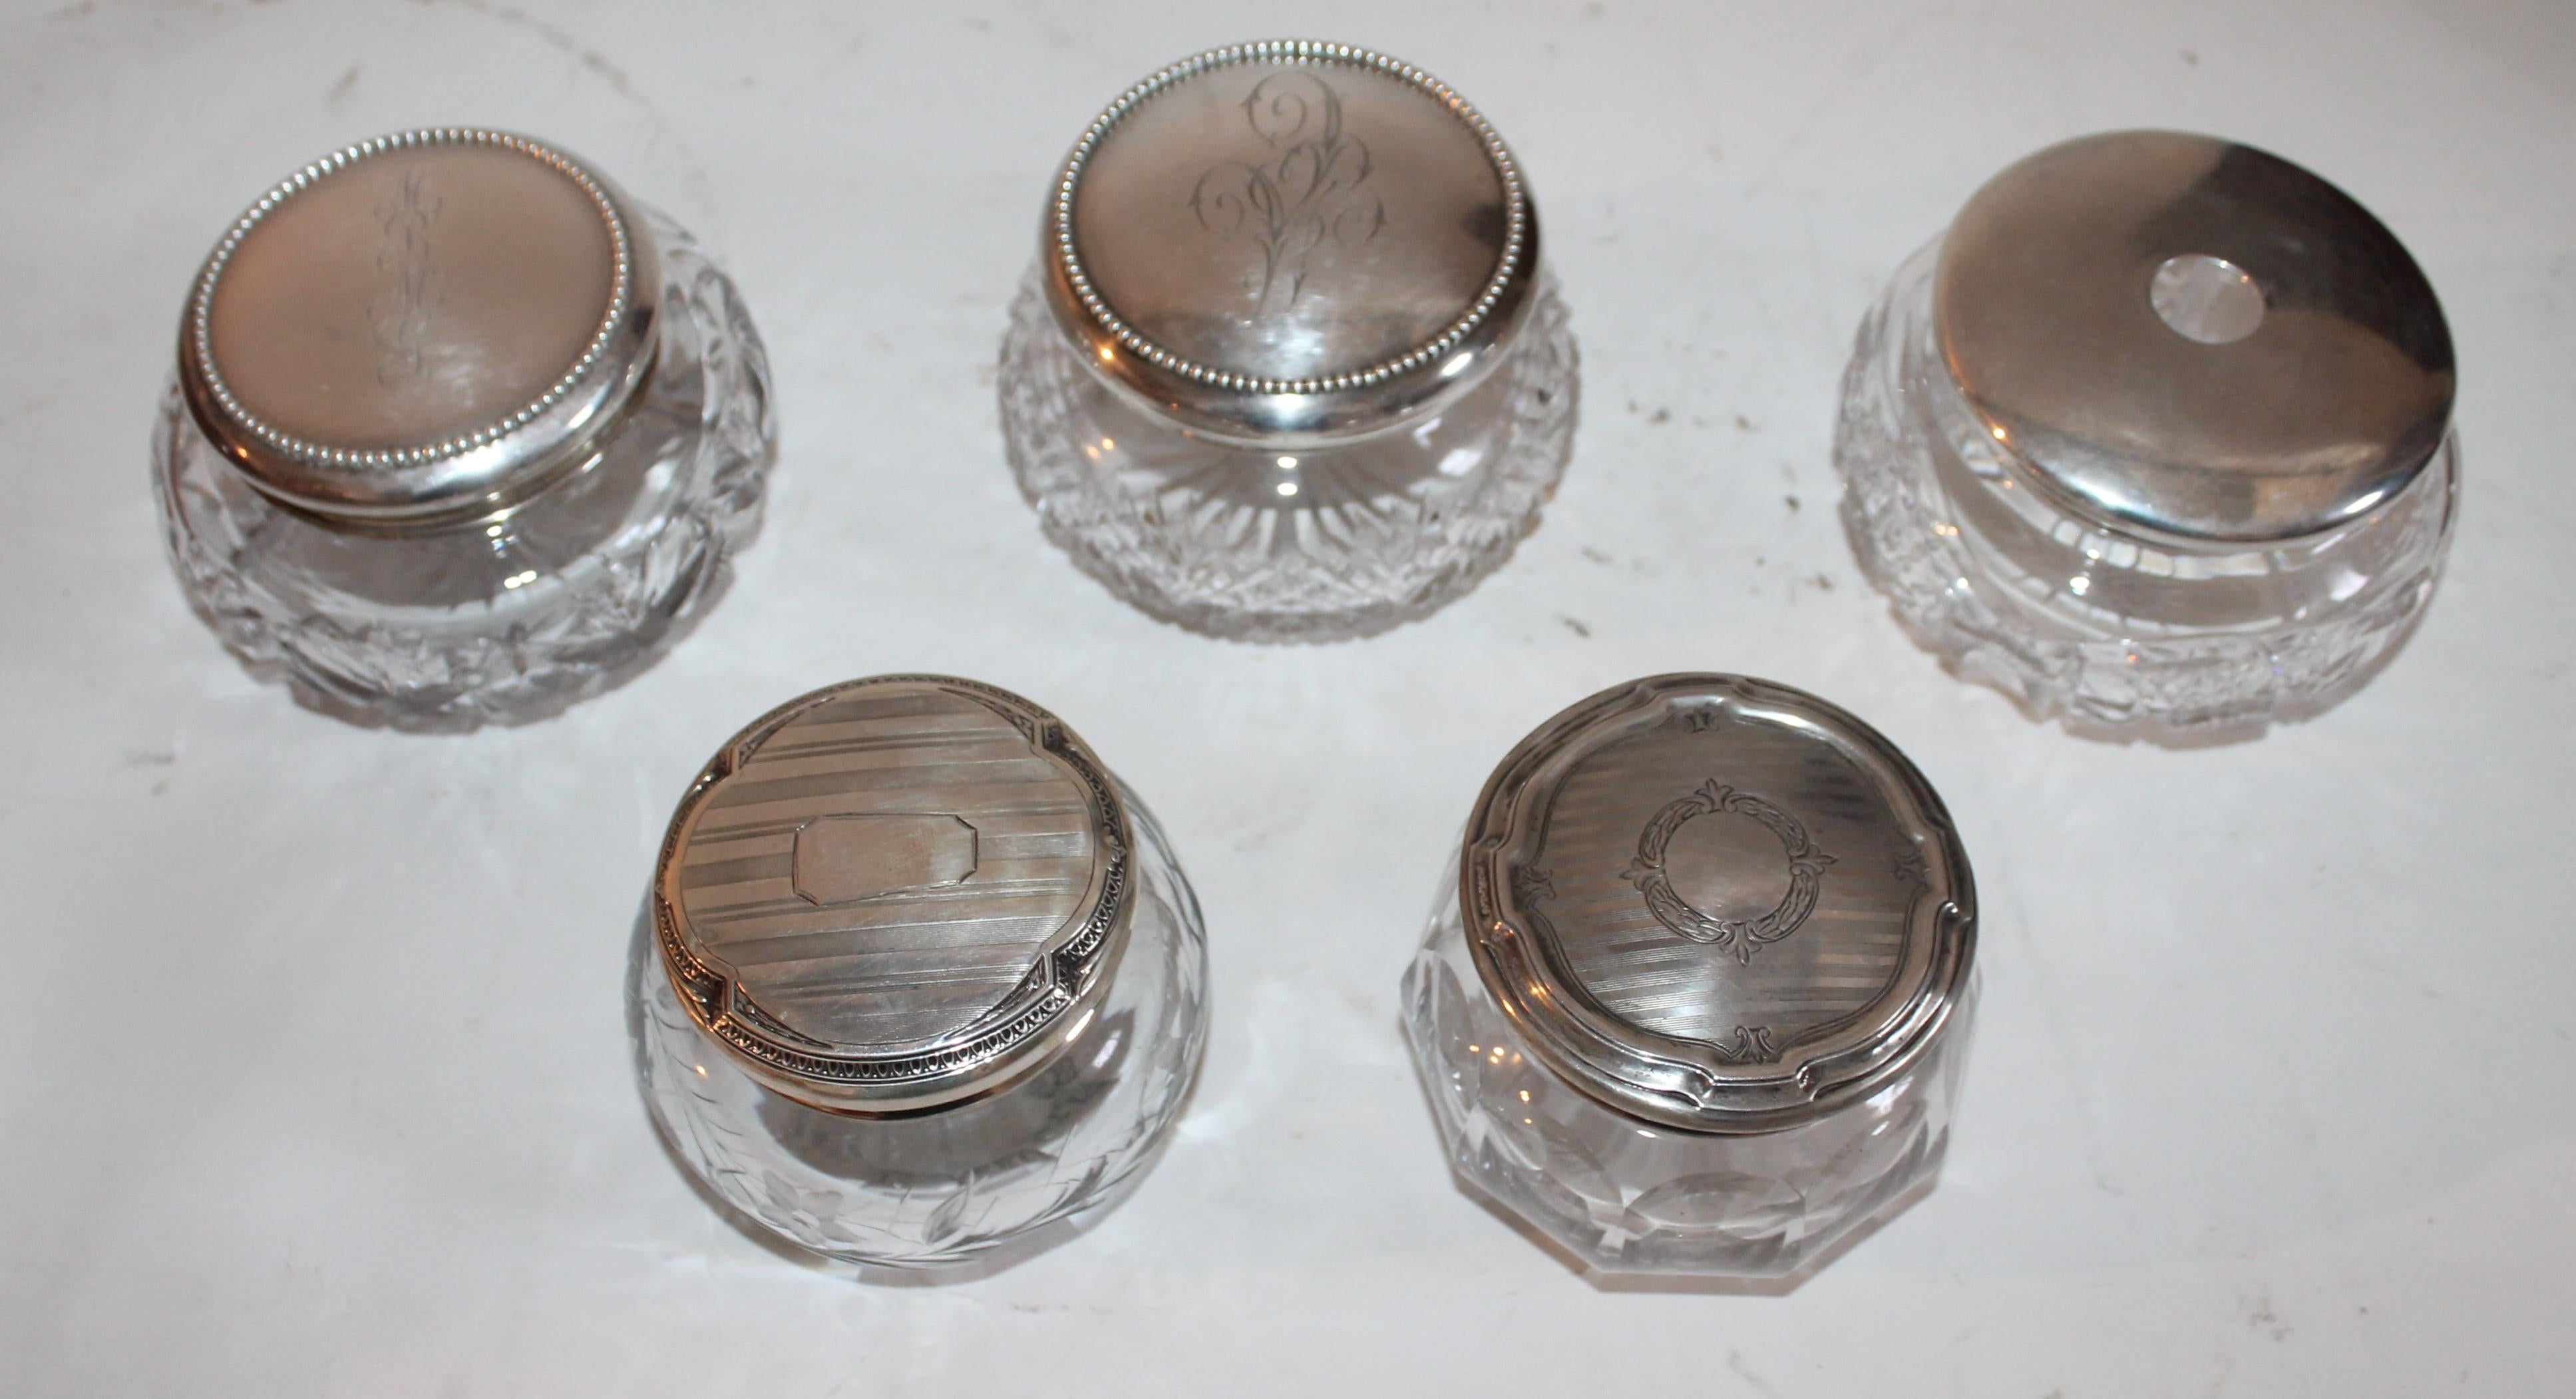 Measurements are as follows from left to right taken from the first photo within the listing. All are in pristine condition. All are marked sterling.
Measures: 4.75 x 3.5
4.5 x 3.5
4.5 x 3.5
3.5 x 3
3.5 x 3.